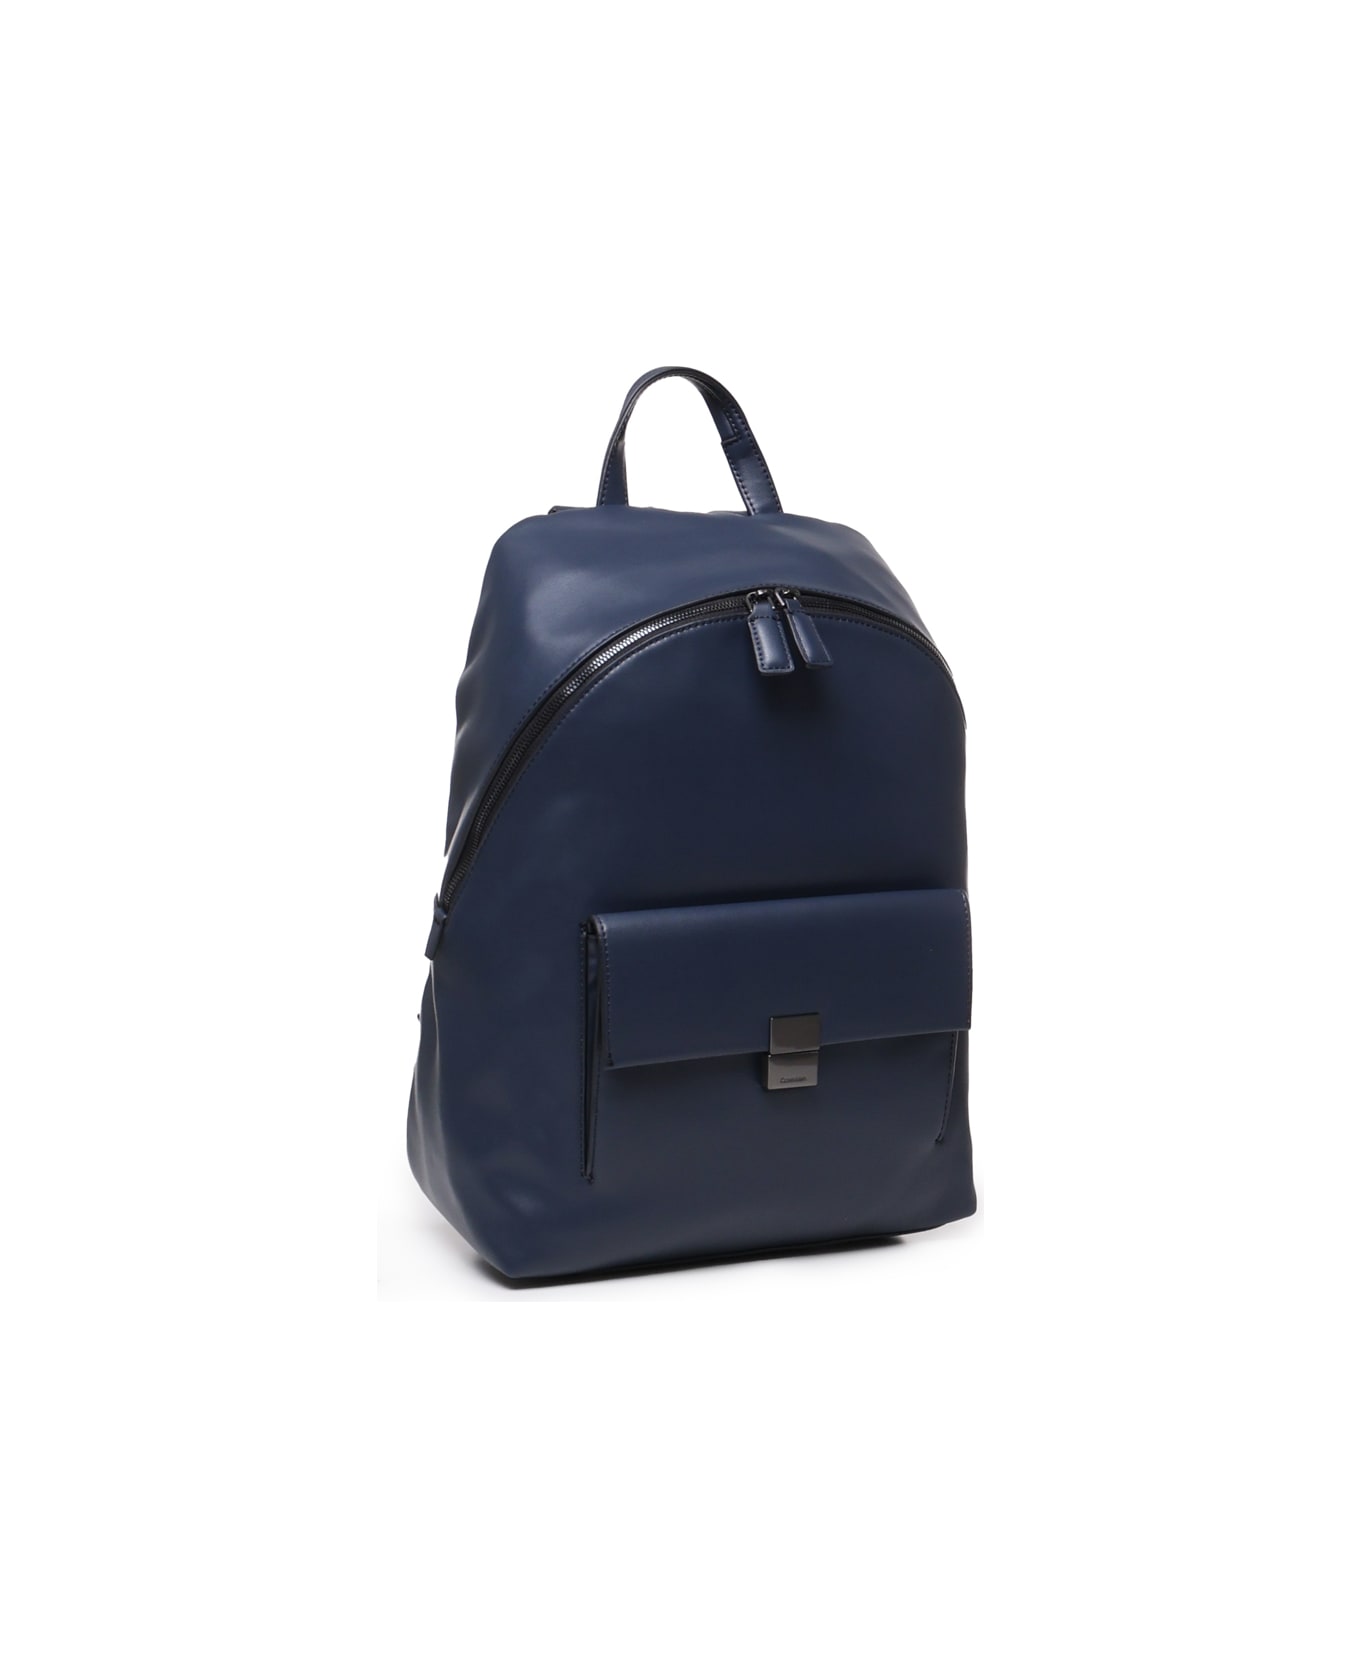 Calvin Klein Faux Leather Backpack - Blu navy